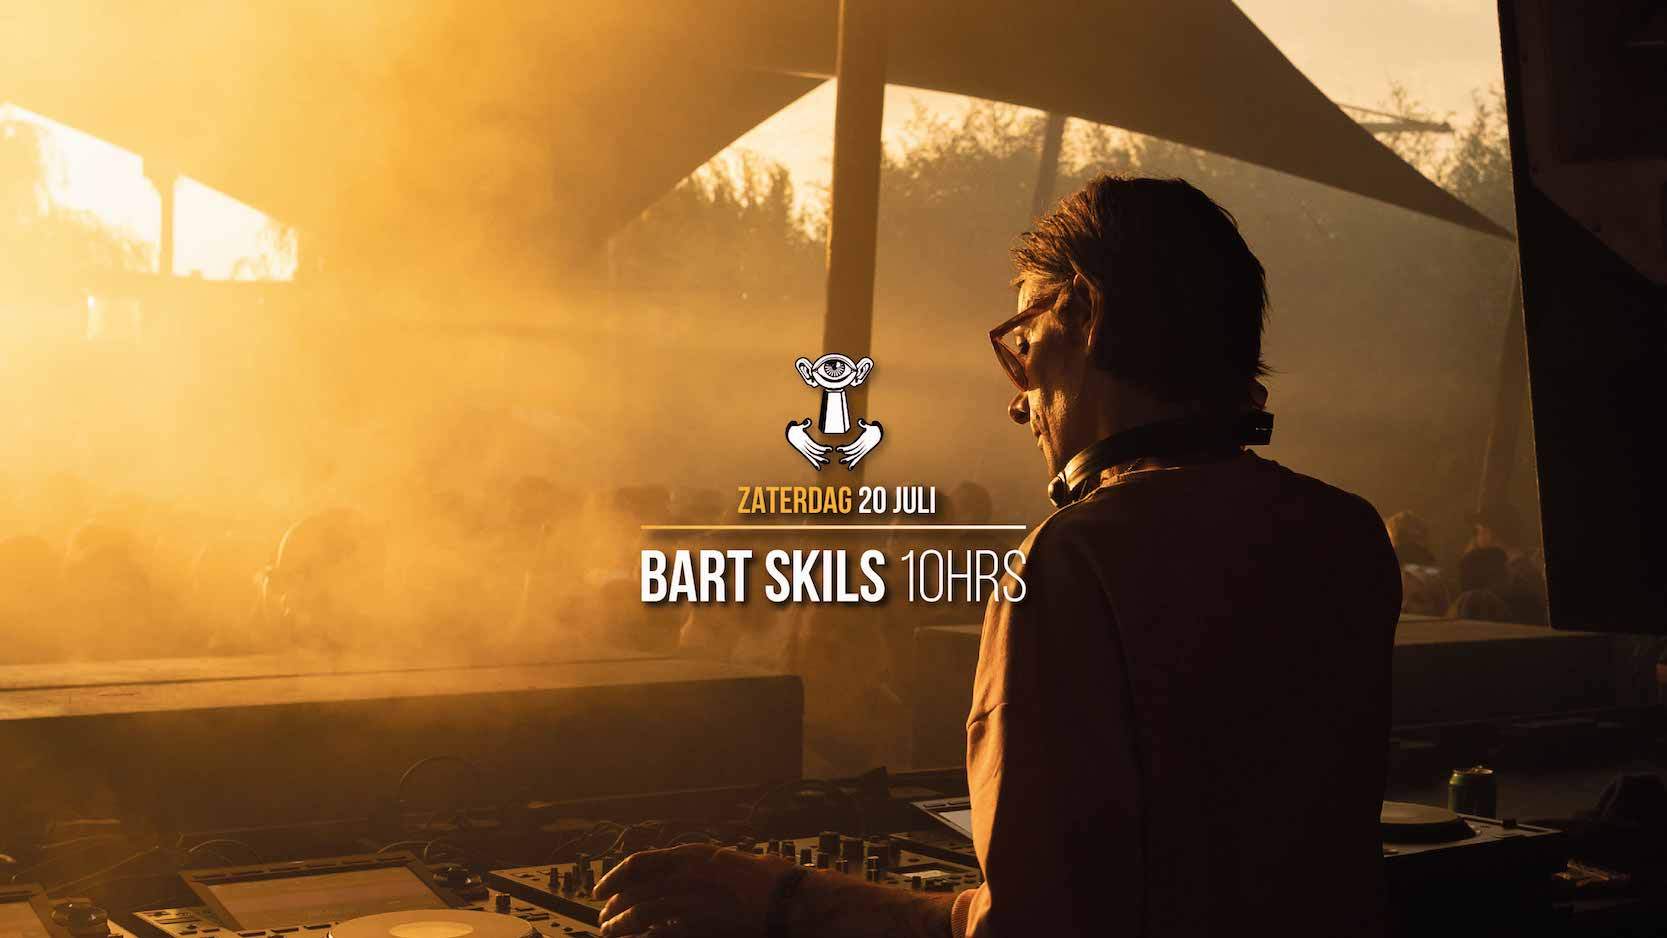 20 JUL - Thuishaven with Bart Skils 10HRS - フライヤー表